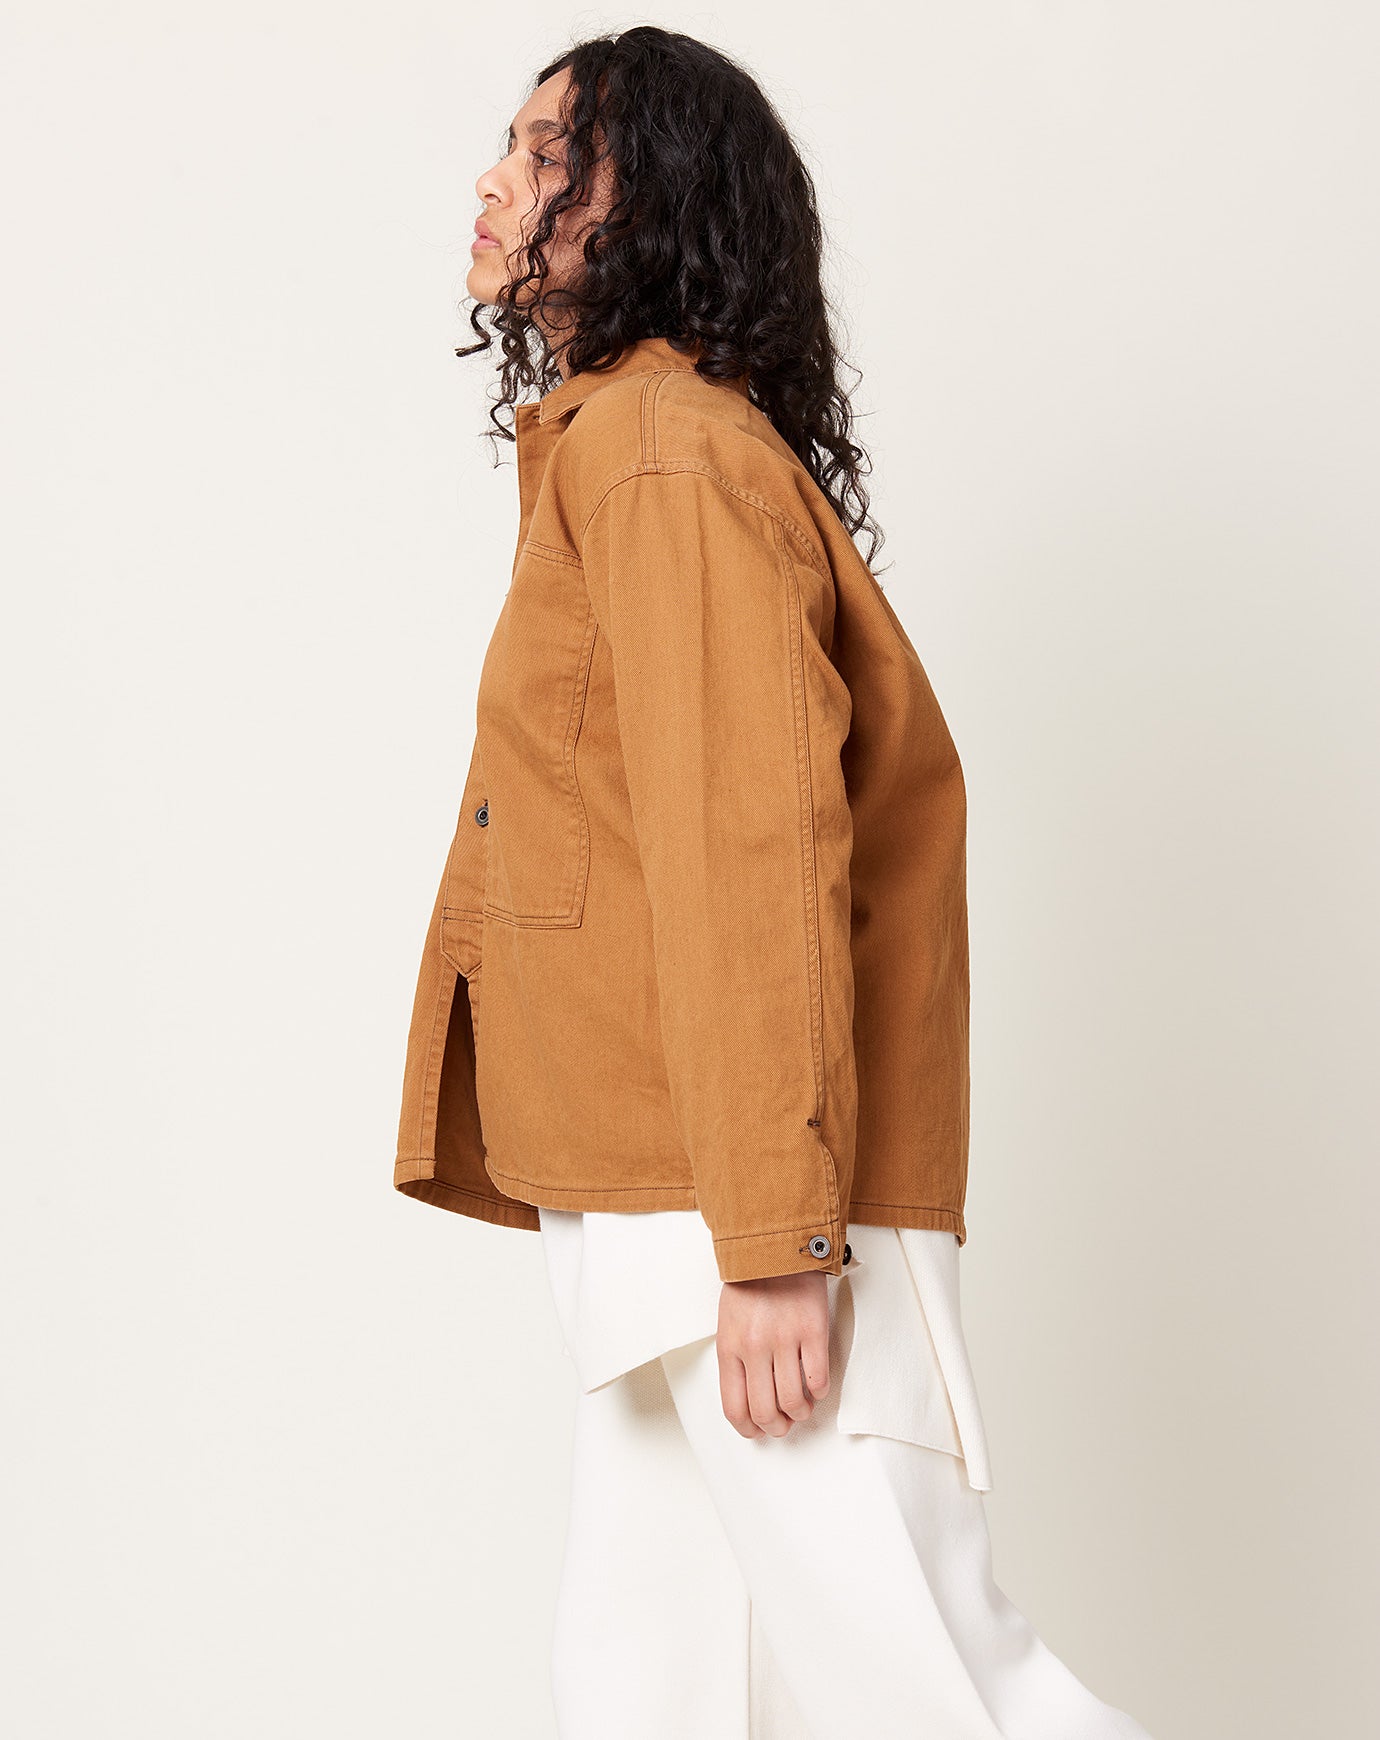 Chimala Classic Drill US Army Work Jacket in Camel